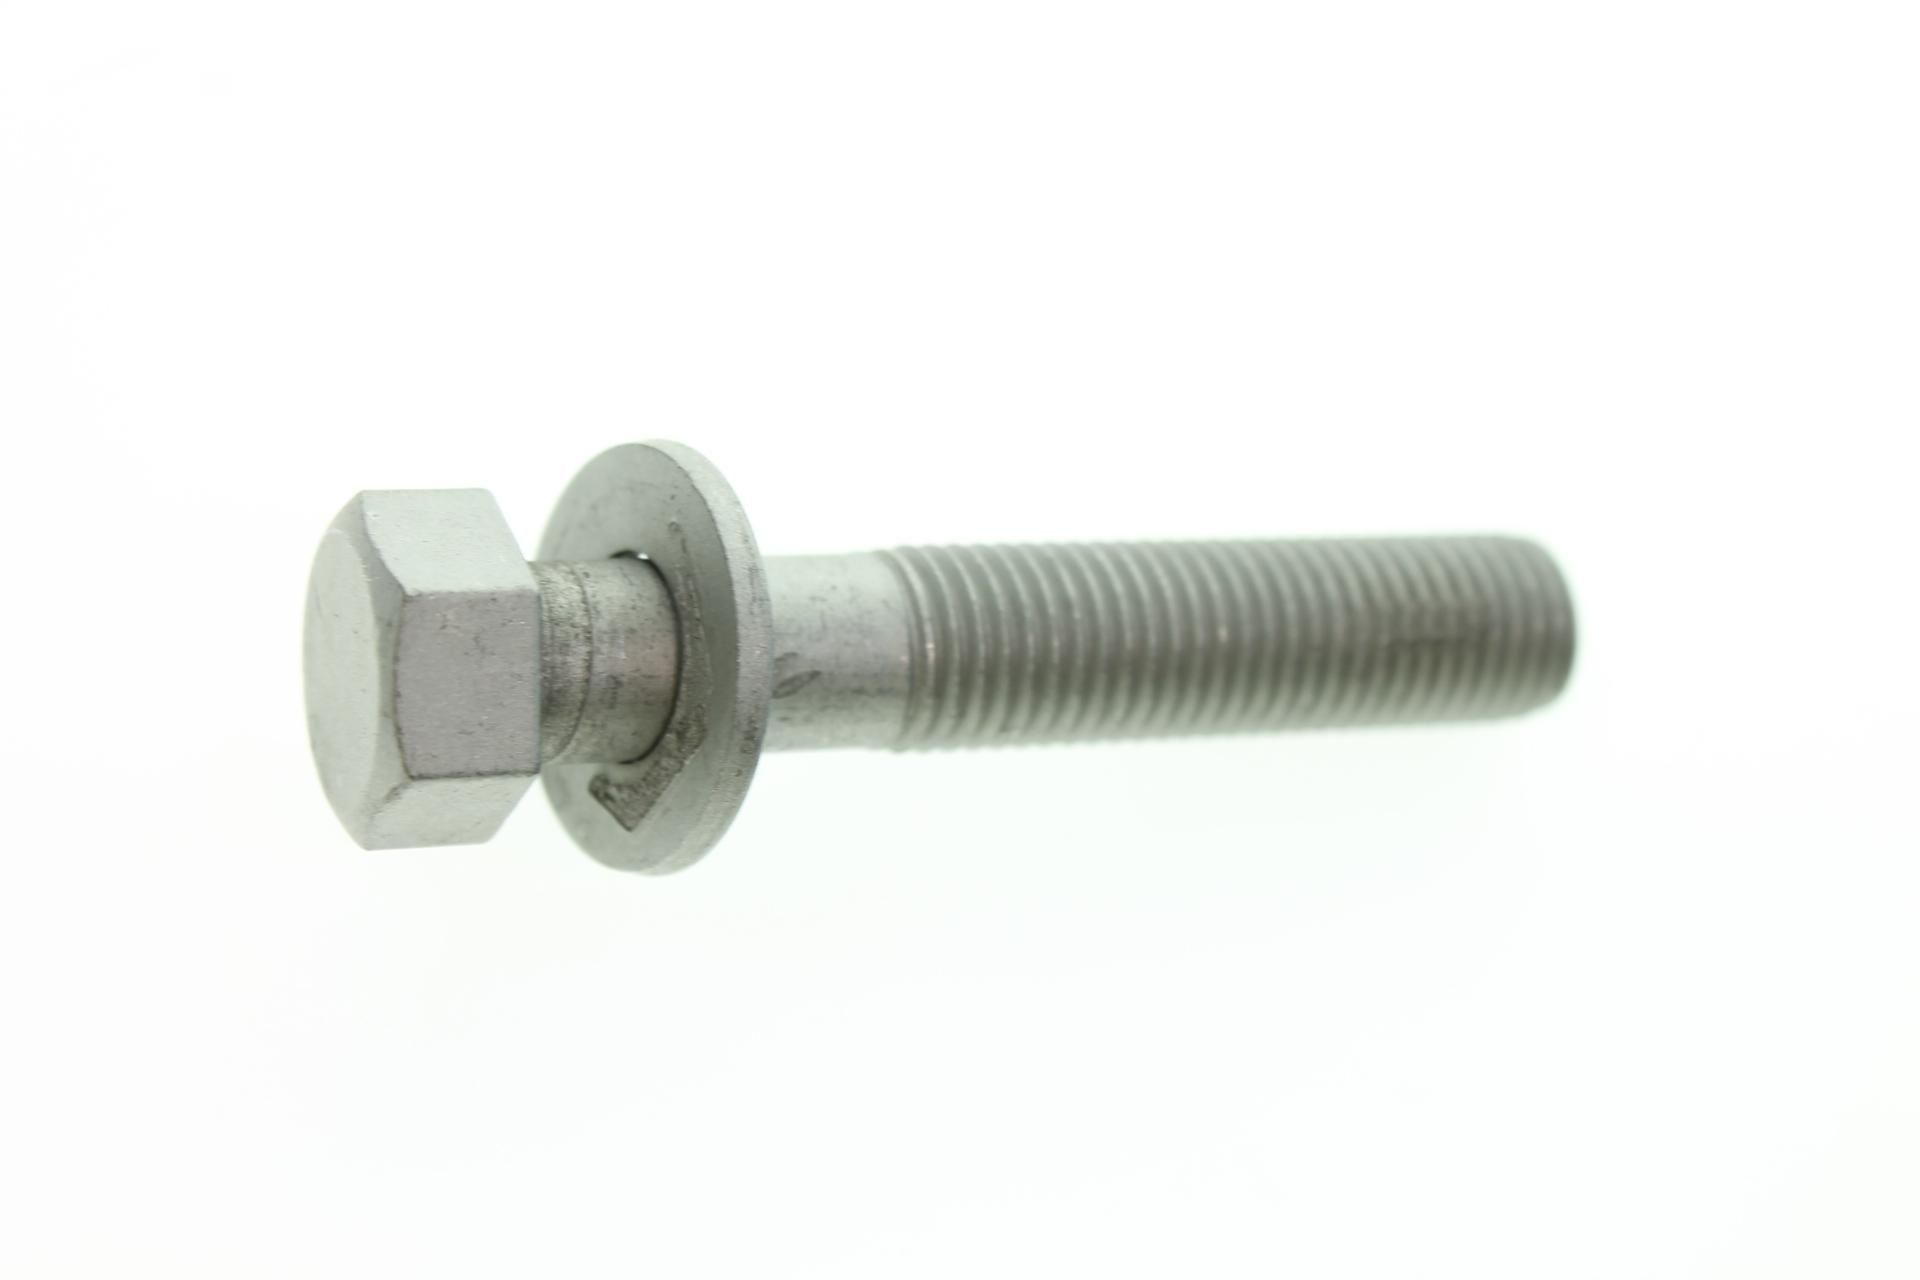 09117-10038 Superseded by 09116-10150 - BOLT,10X55